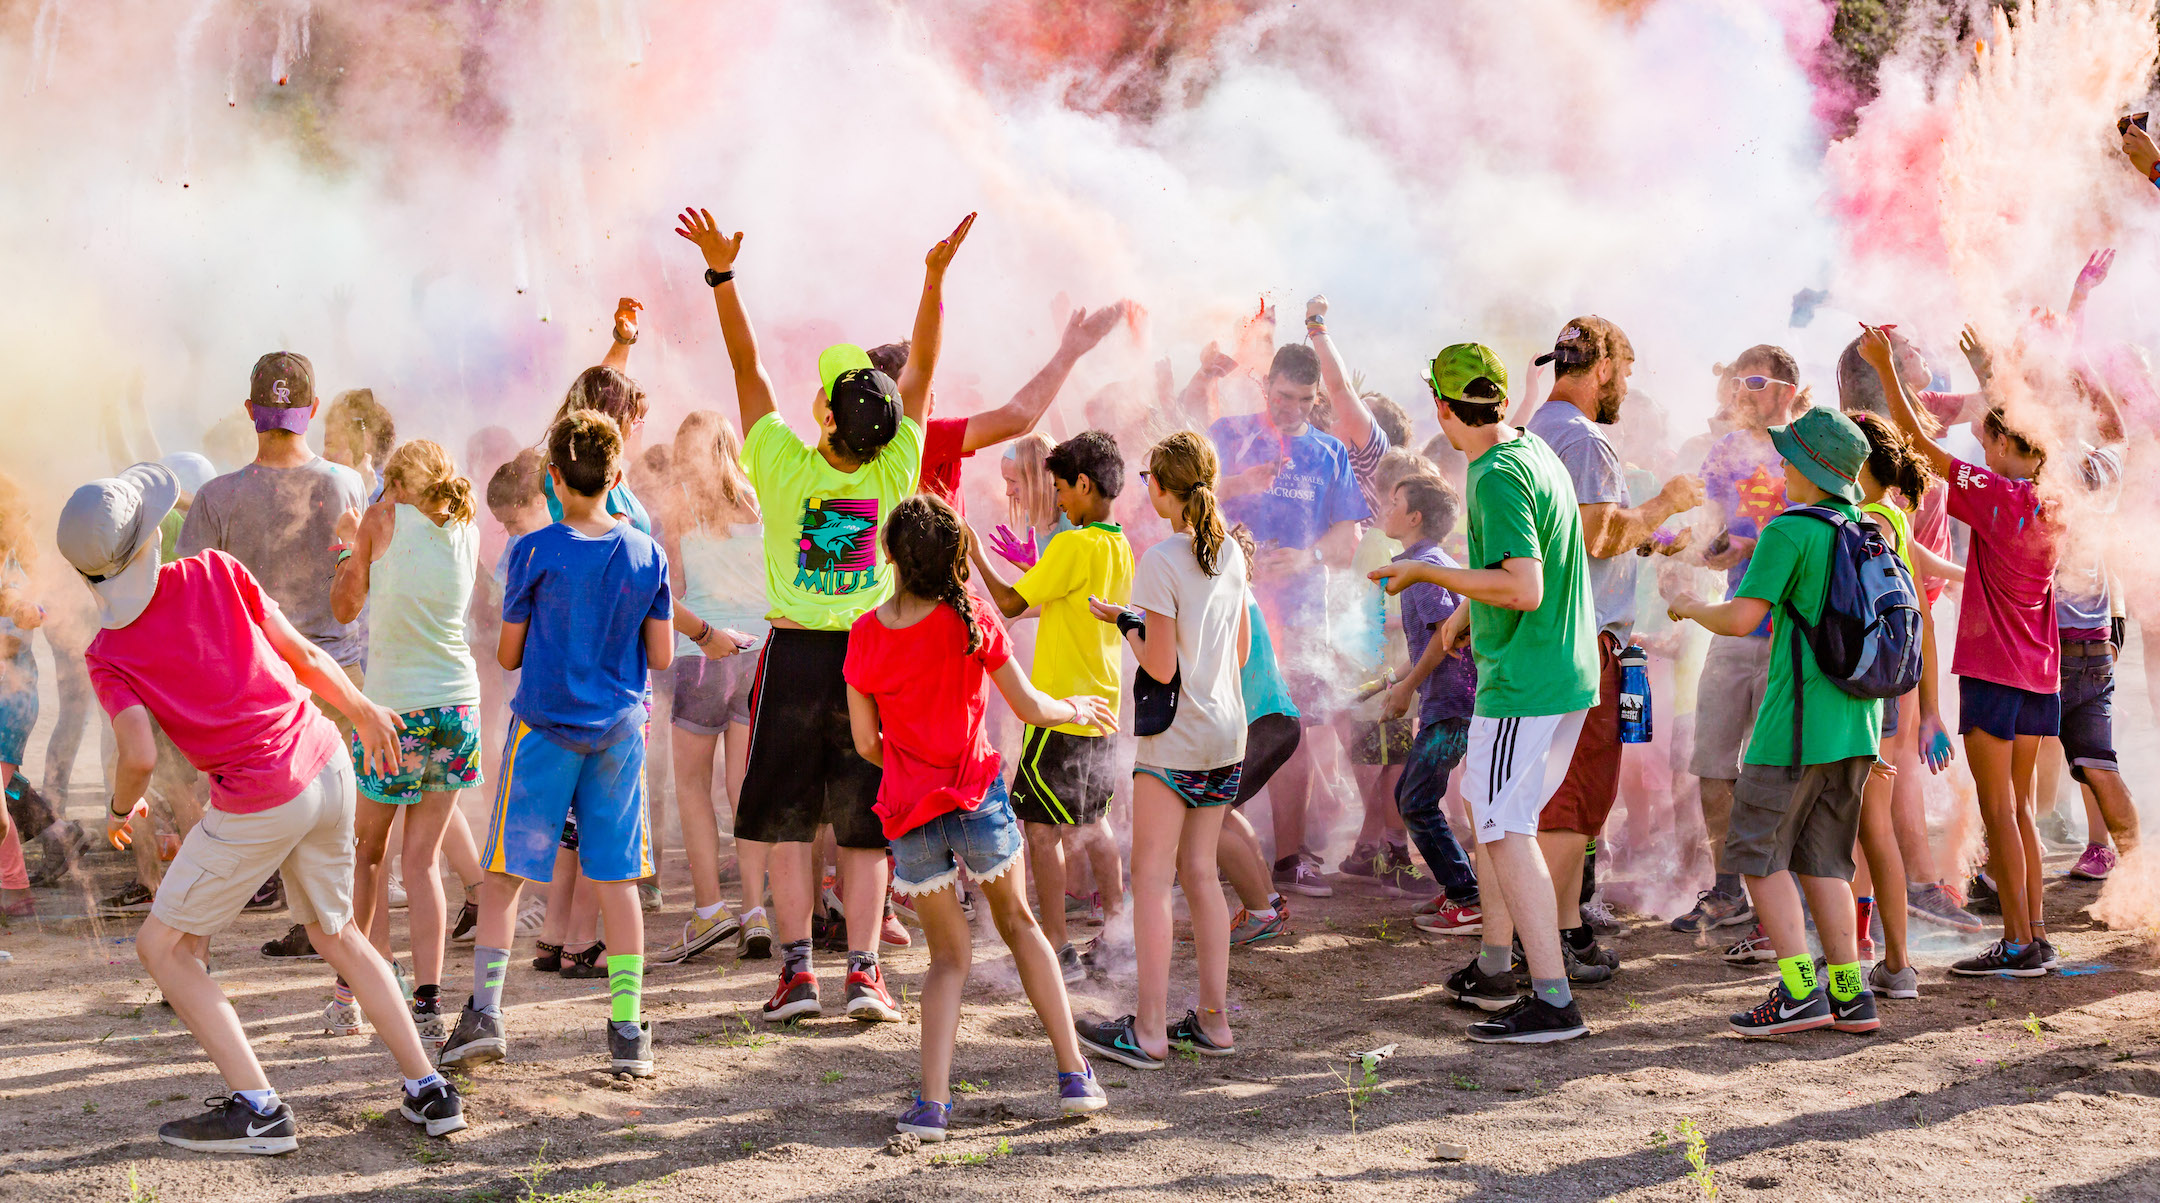 Like many camp activities, the 2017 Color War at JCC Ranch Camp in Colorado involved crowds of kids. This year, with its summer session canceled, the camp is becoming a family camp with socially distanced activities. (Noah Gallagher)